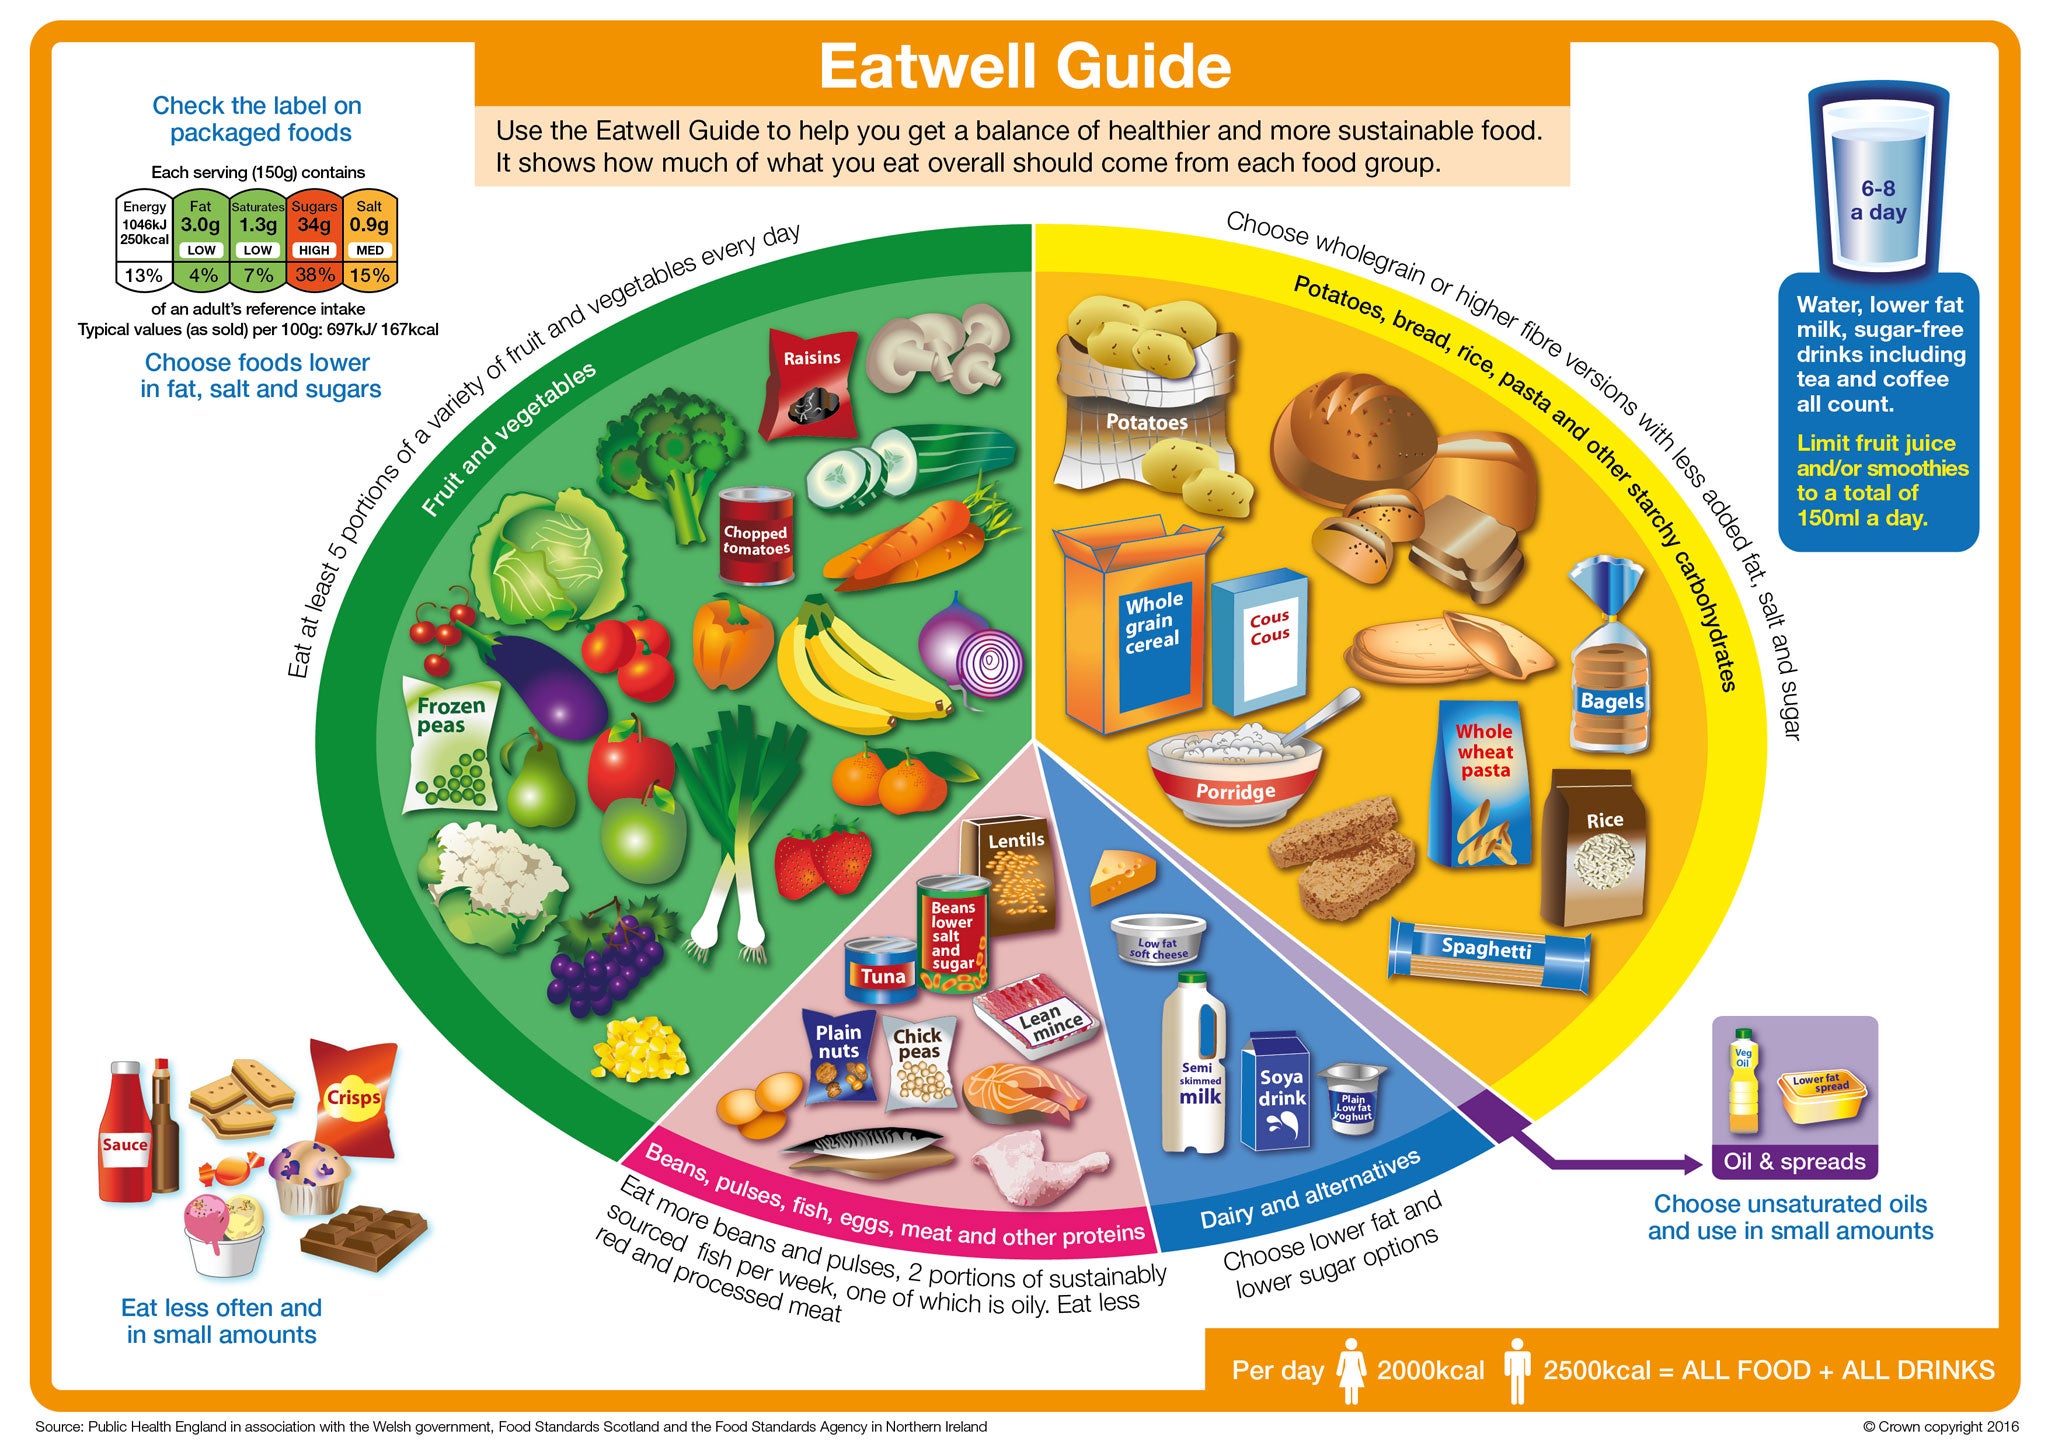 The Eatwell Guide was unveiled in March